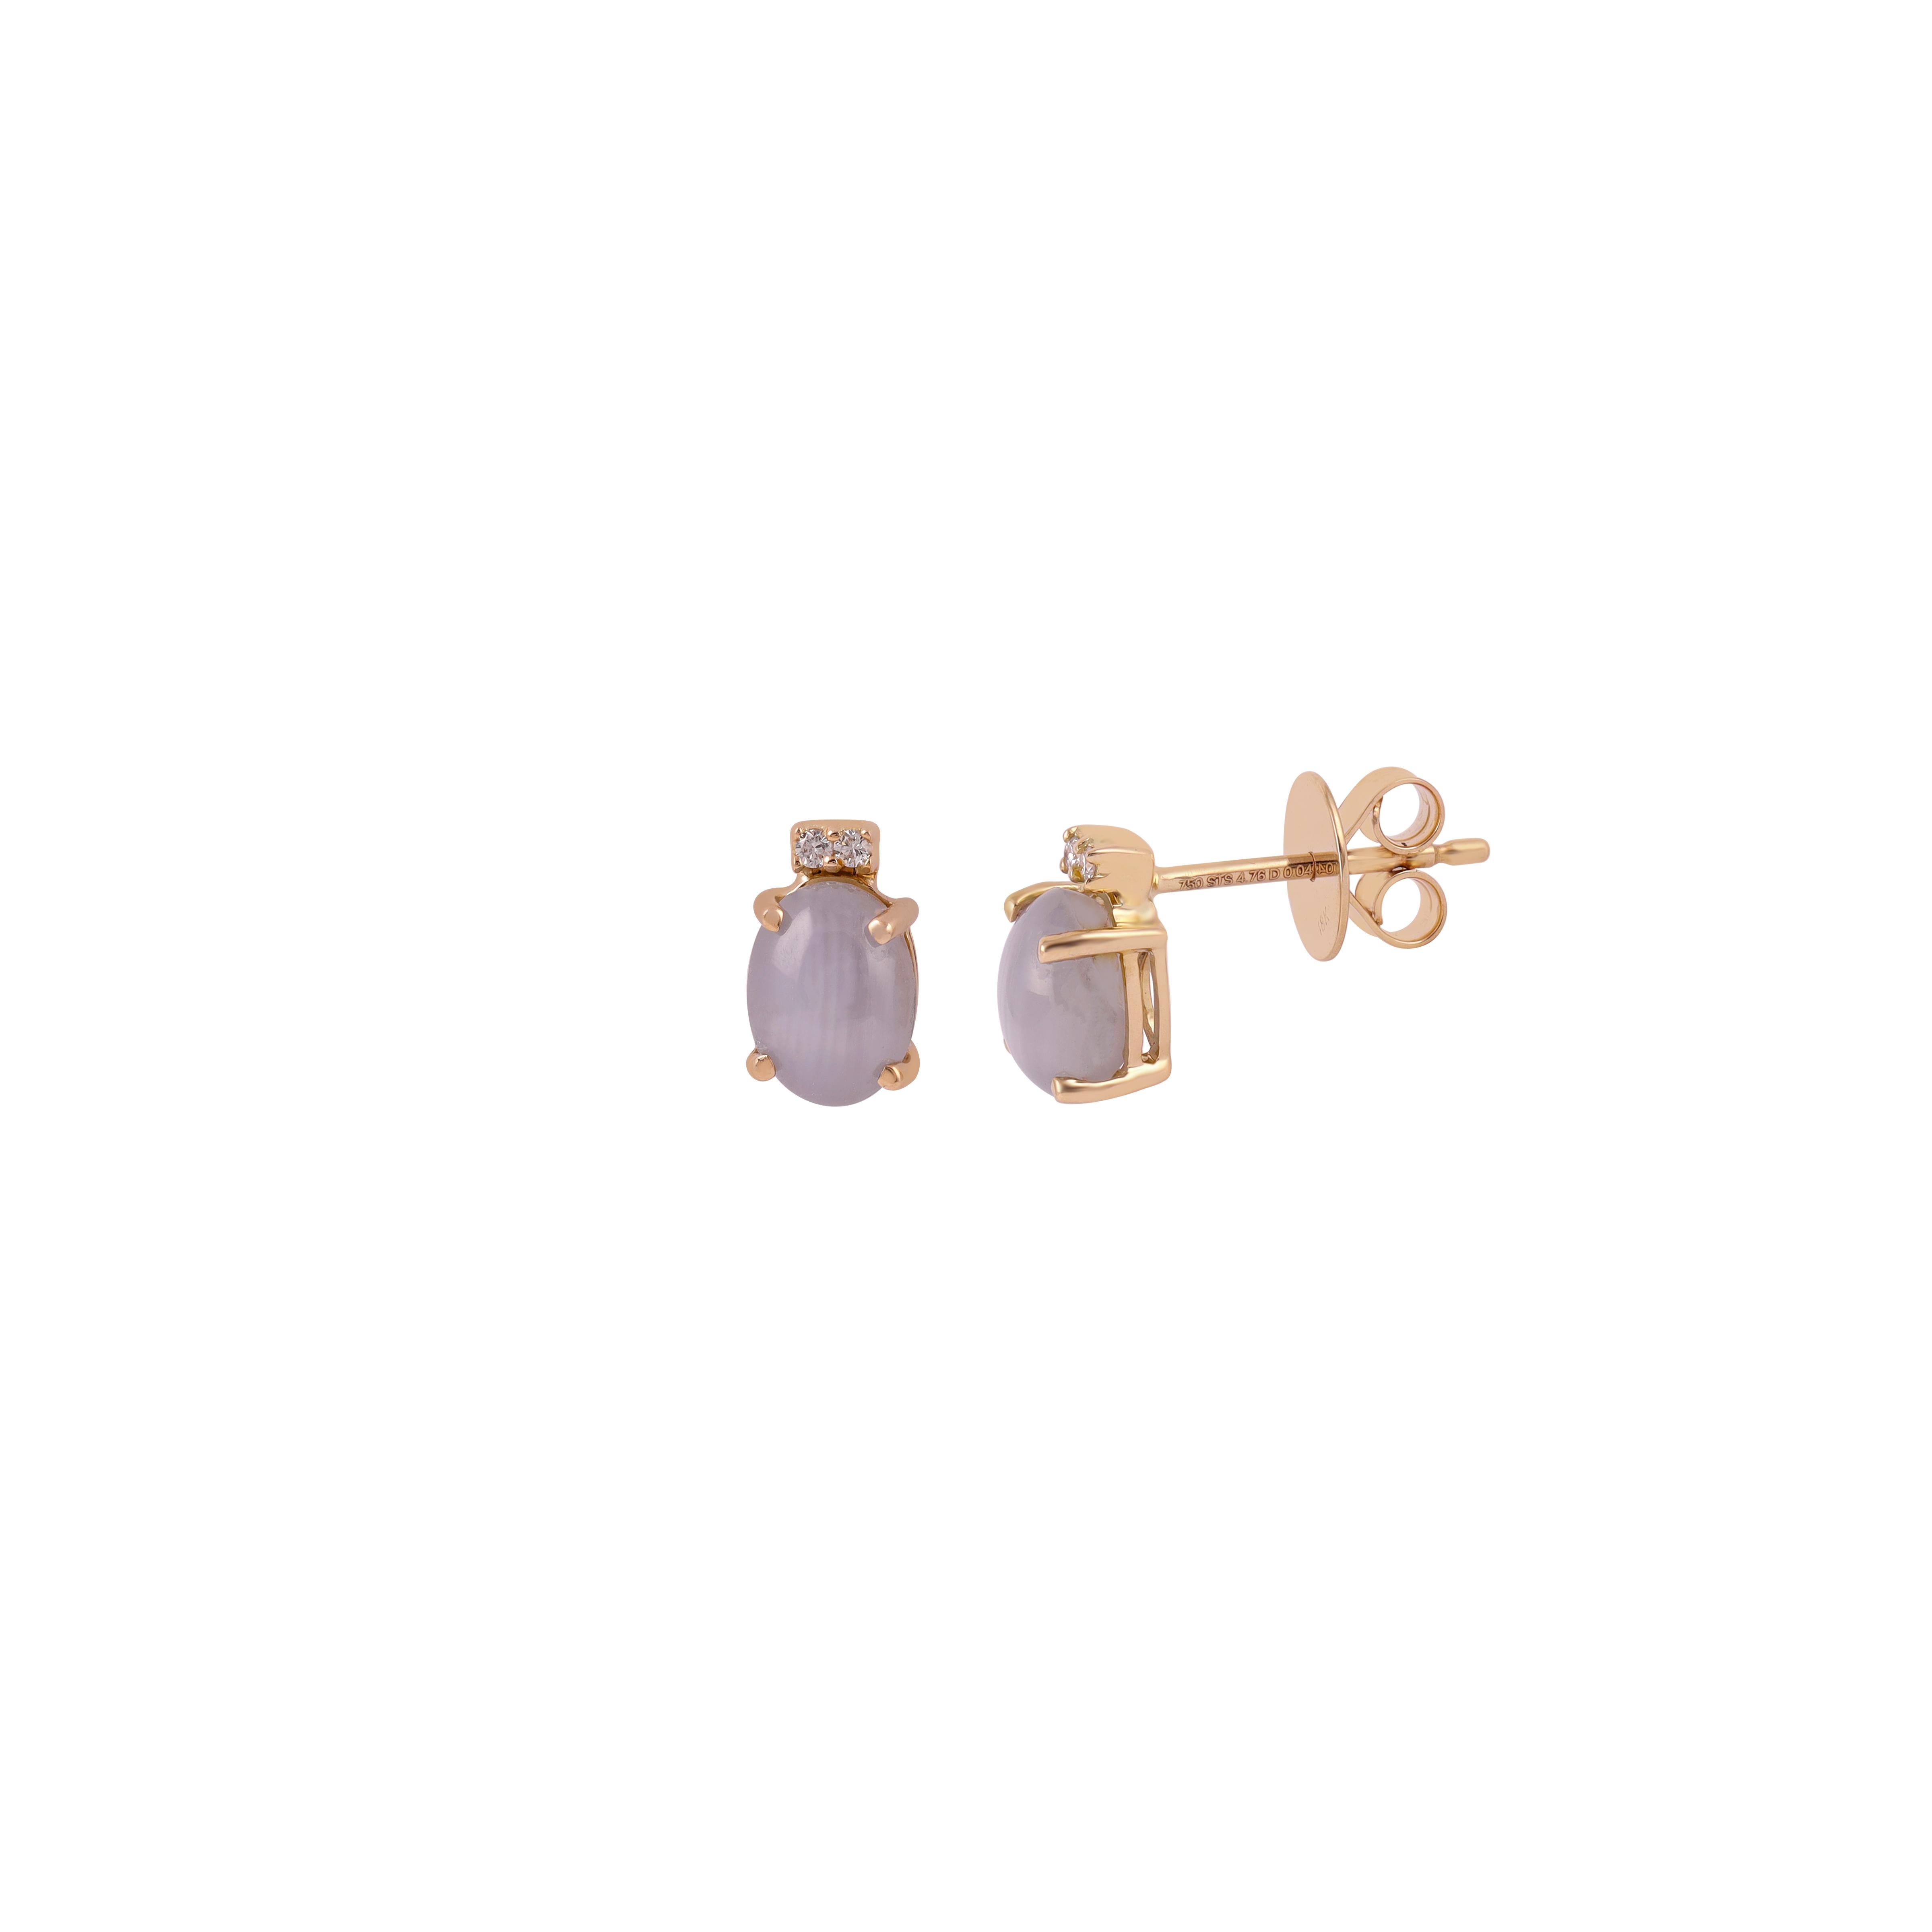 Modernist 4.76 Carat 6 Line Star Sapphire and Diamond Earrings Stud in 18k Yellow Gold For Sale